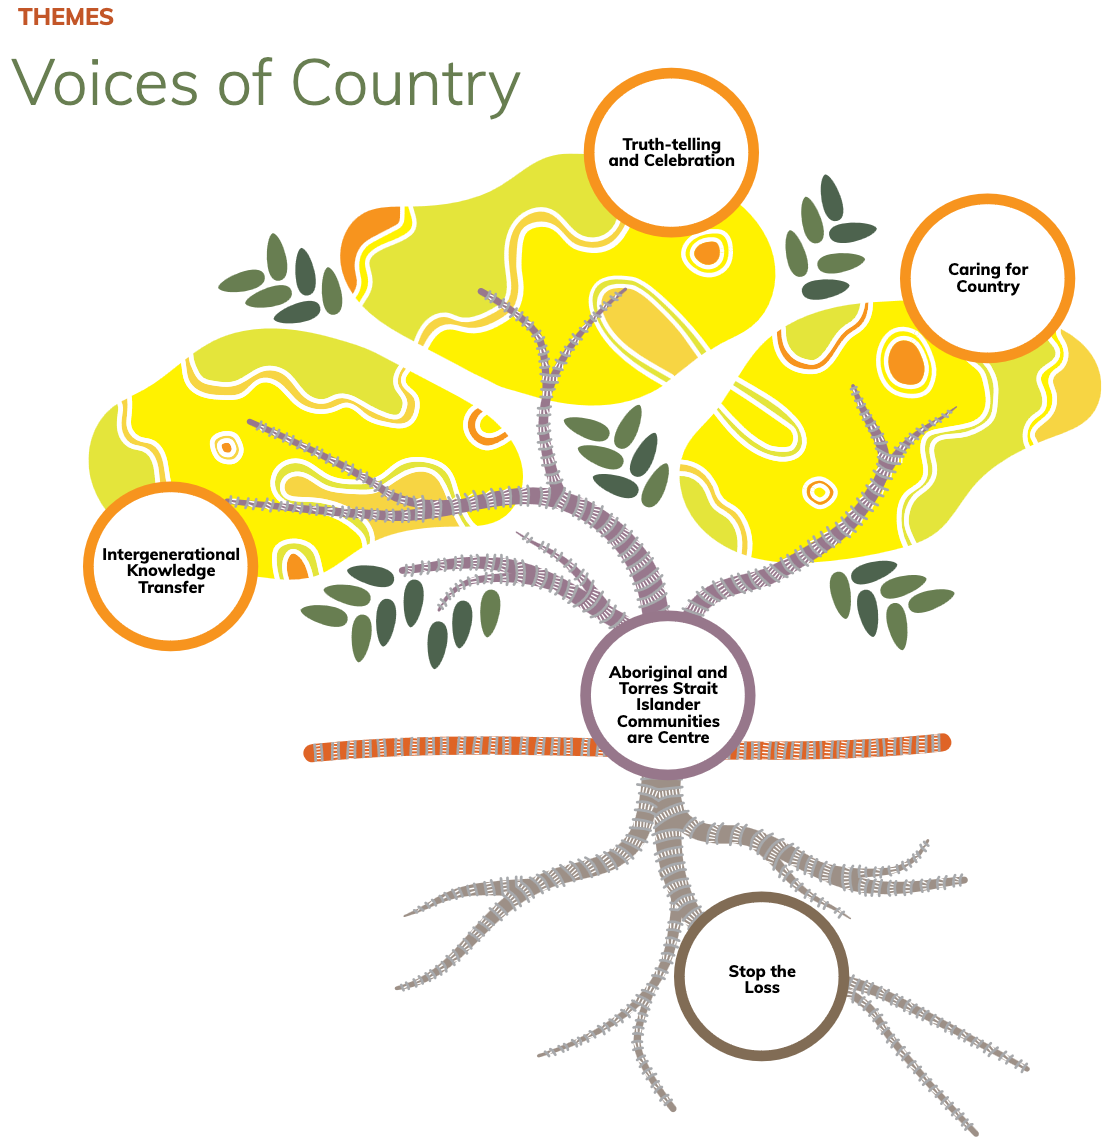 Voices of Country is guided by five inter-connected themes, represented as a native wattle tree, itself a source of food, medicine and tools, with language, culture and traditional knowledges as its foundation.